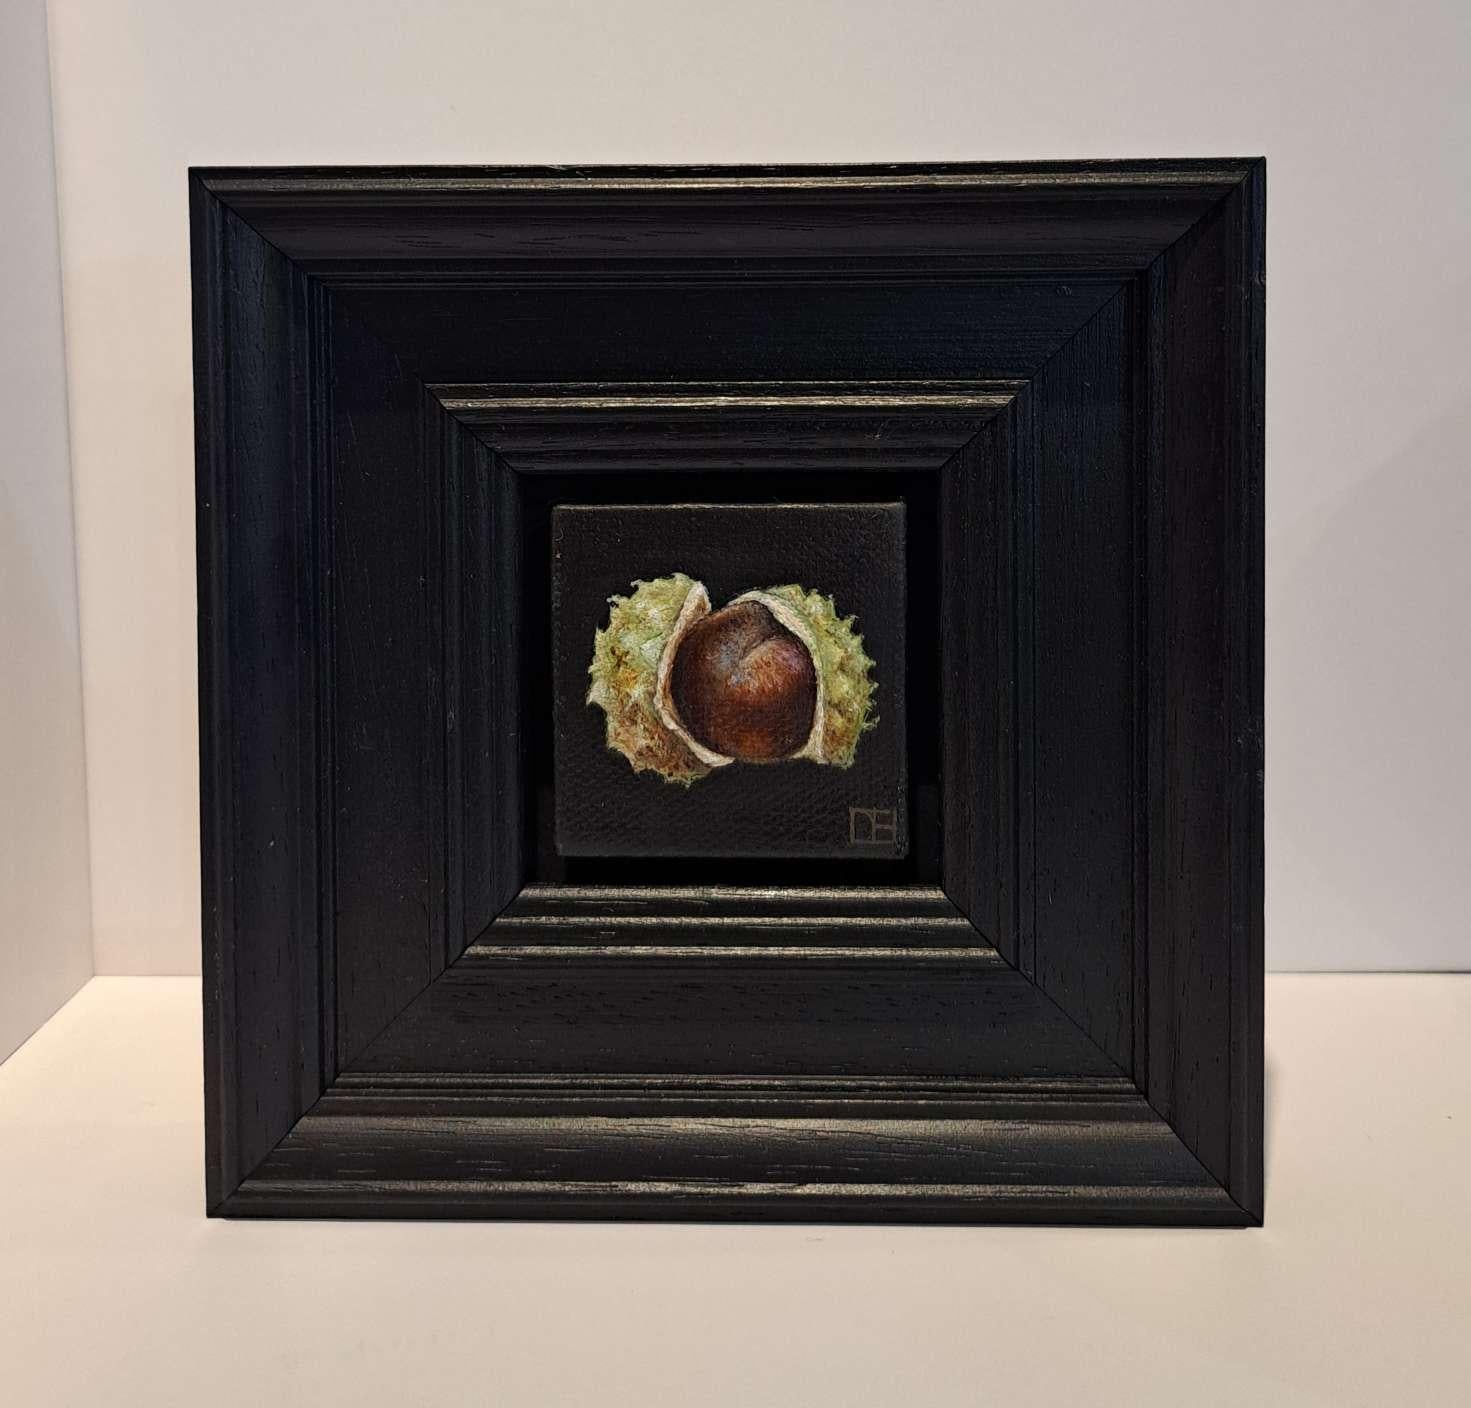 Pocket Conker and Shell 2 c is an original oil painting by Dani Humberstone as part of her Pocket Painting series featuring small scale realistic oil paintings, with a nod to baroque still life painting. The paintings are set in a black wood layered